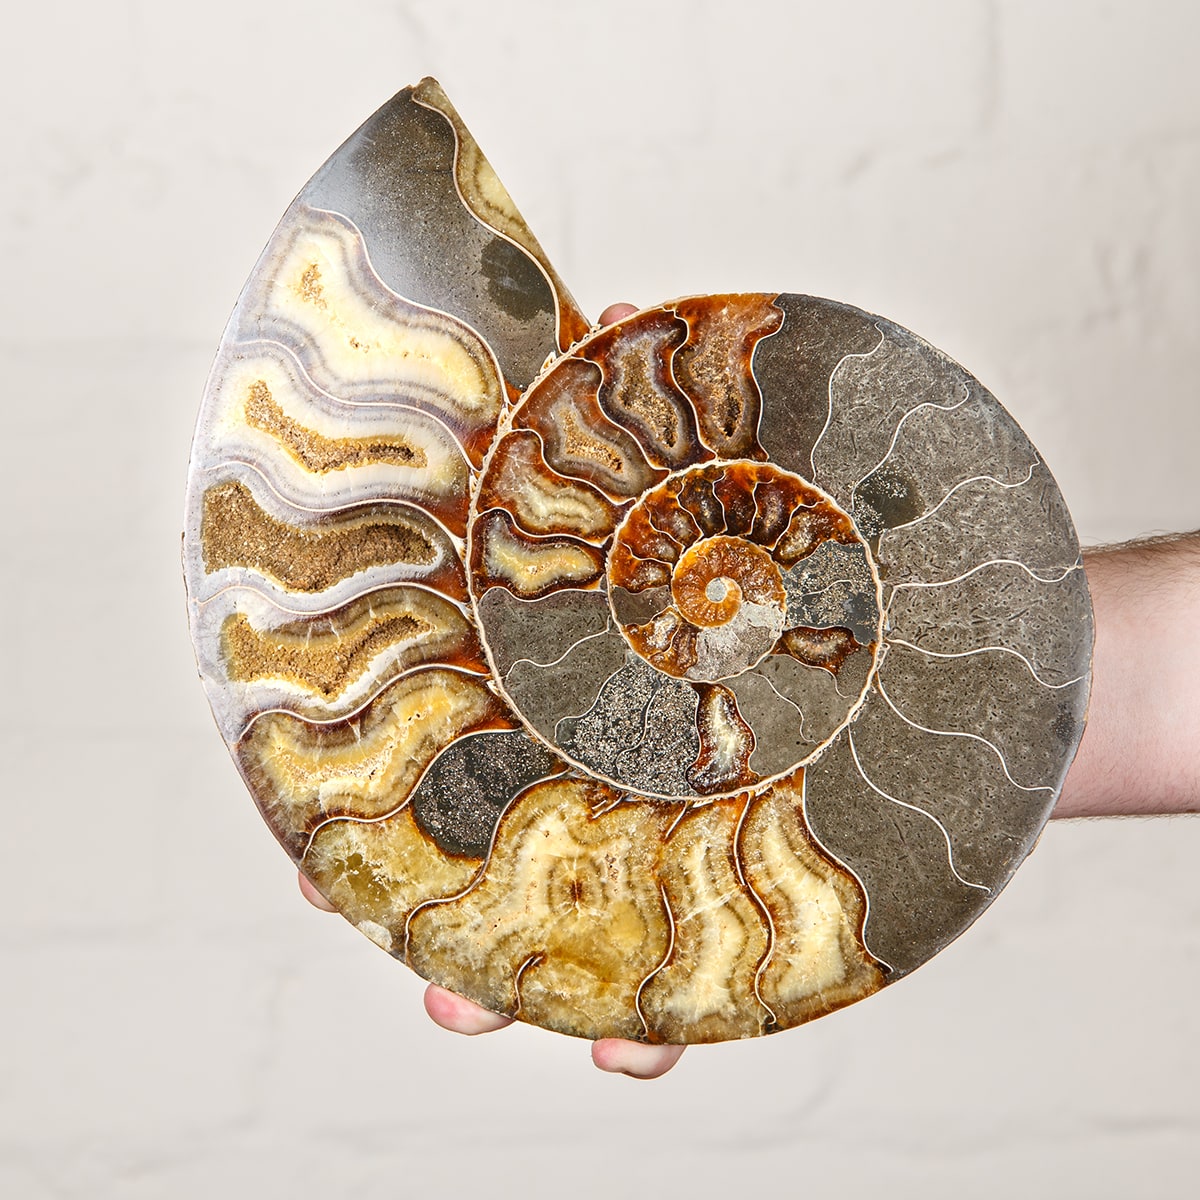 Huge  inch Polished & Sliced Ammonite Fossil on Stand (Cleoniceras sp)